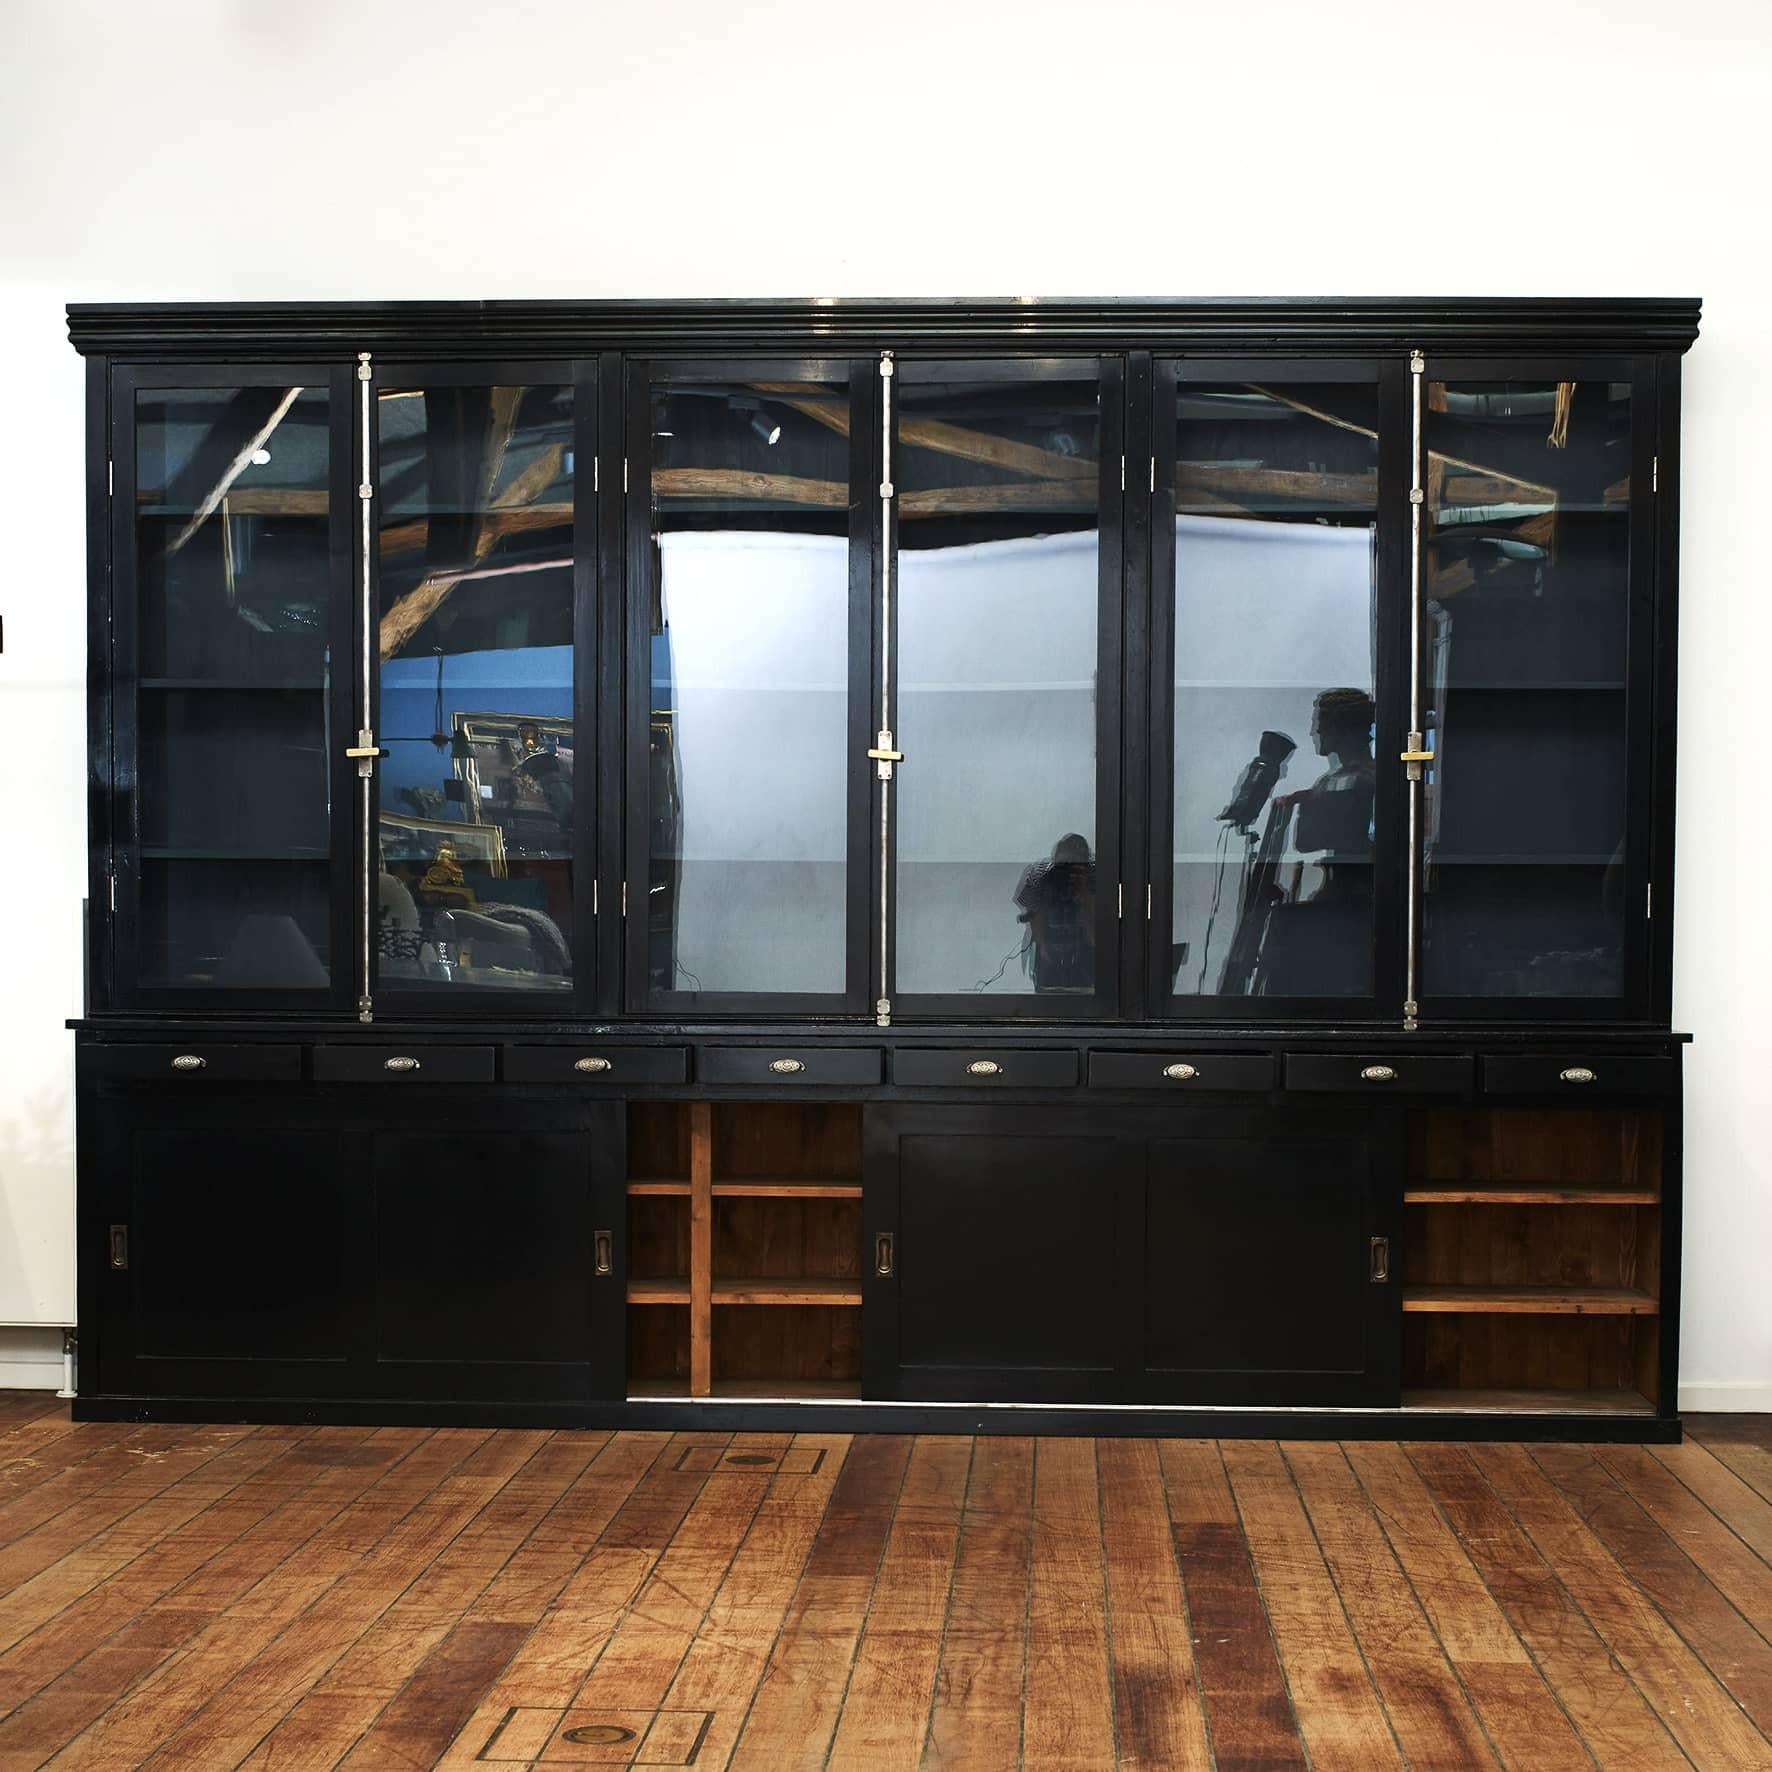 Outstanding large ebonized wood mercantile shop display cabinet. In two parts.
The top section having 3 glass doors that open up to shelves for ample storage, with metal and brass locking mechanism.
The lower section has 8 drawers above 3 sliding